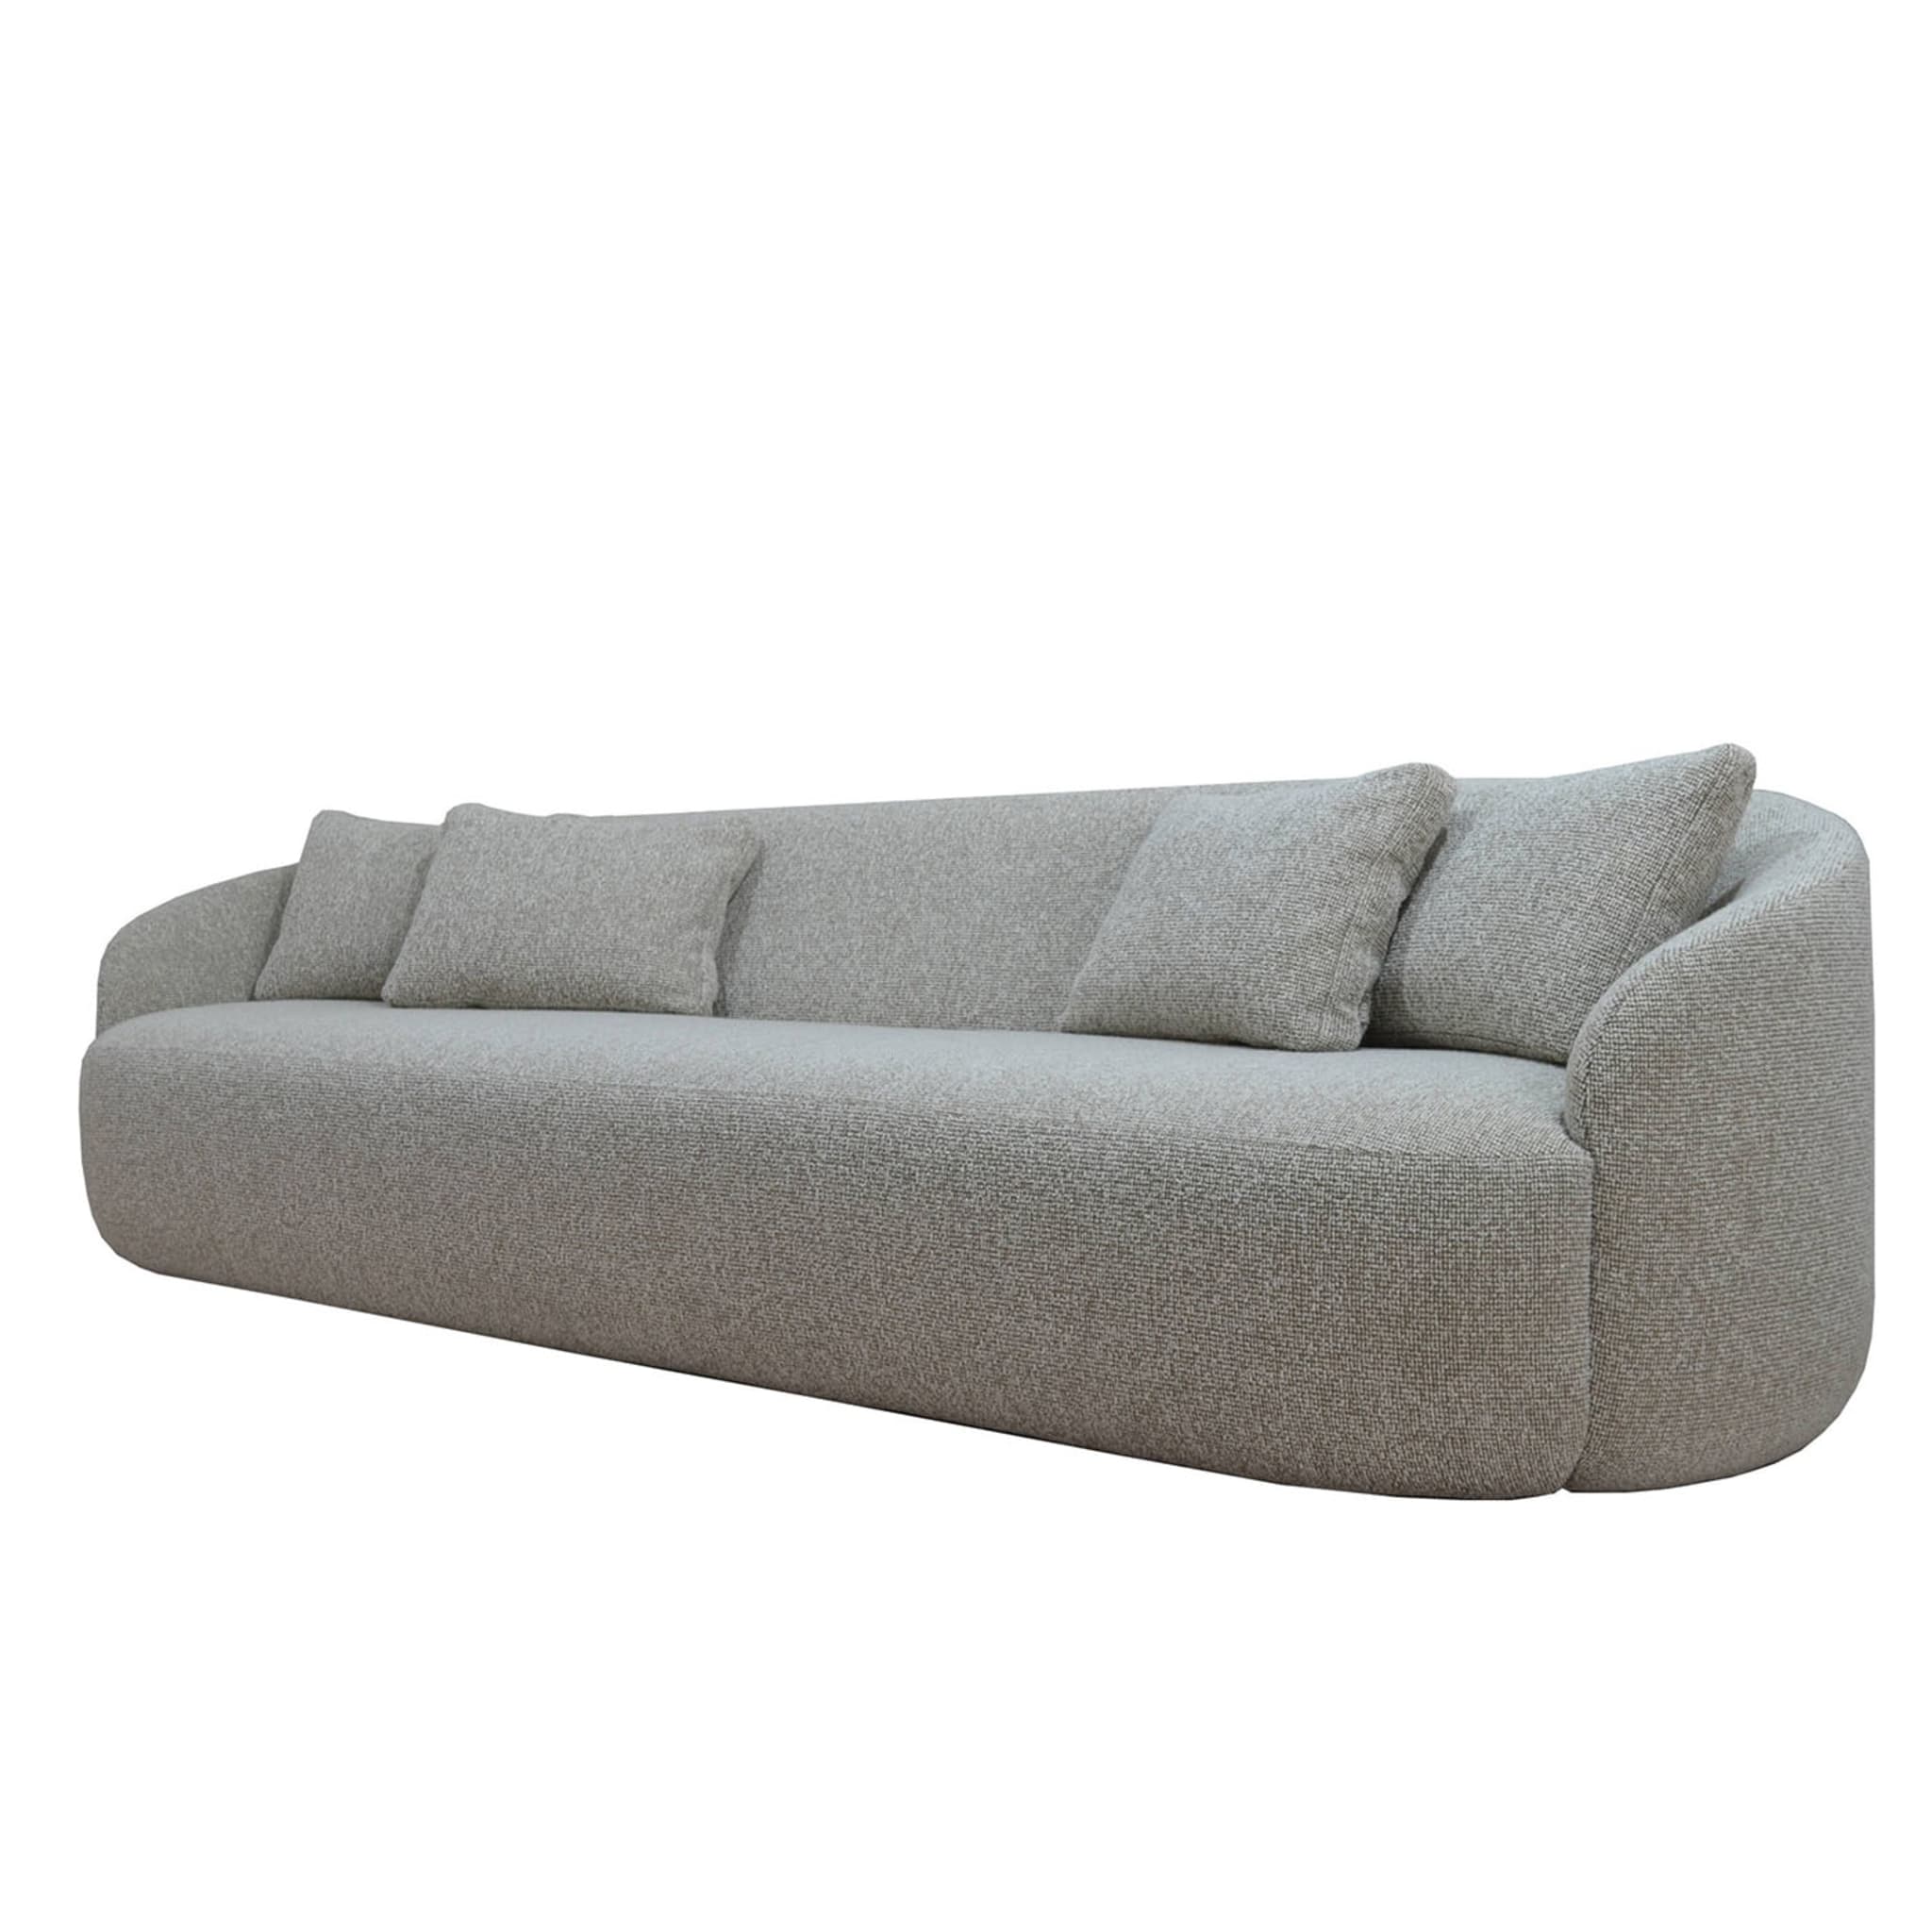 Cottonflower Sofa 280 in Sand Boucle Fabric - Alternative view 1